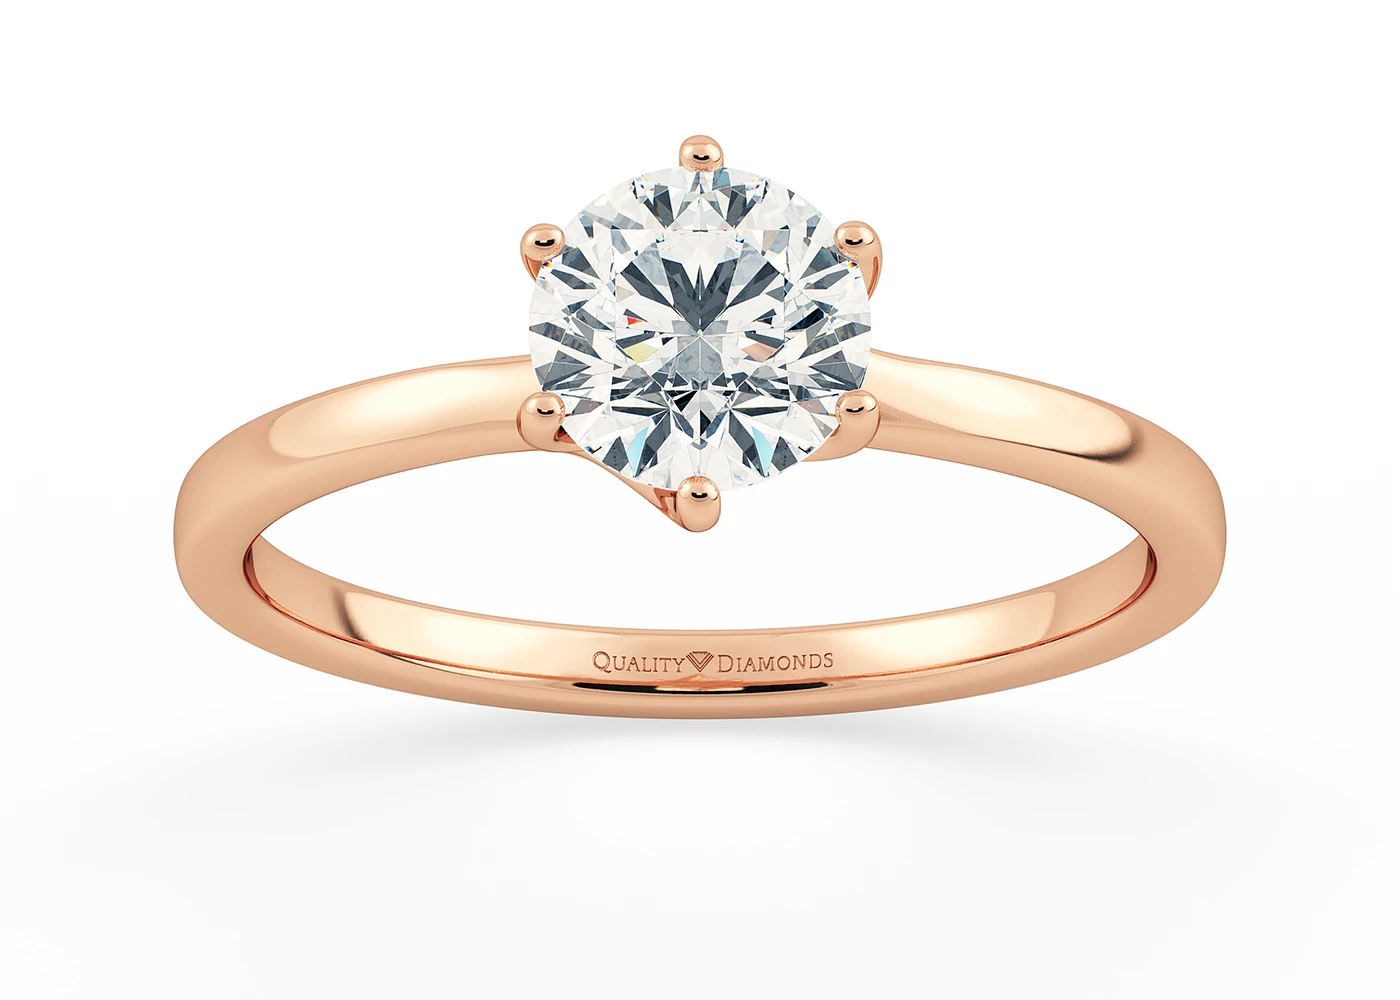 Six Claw Round Brilliant Cura Diamond Ring in 9K Rose Gold